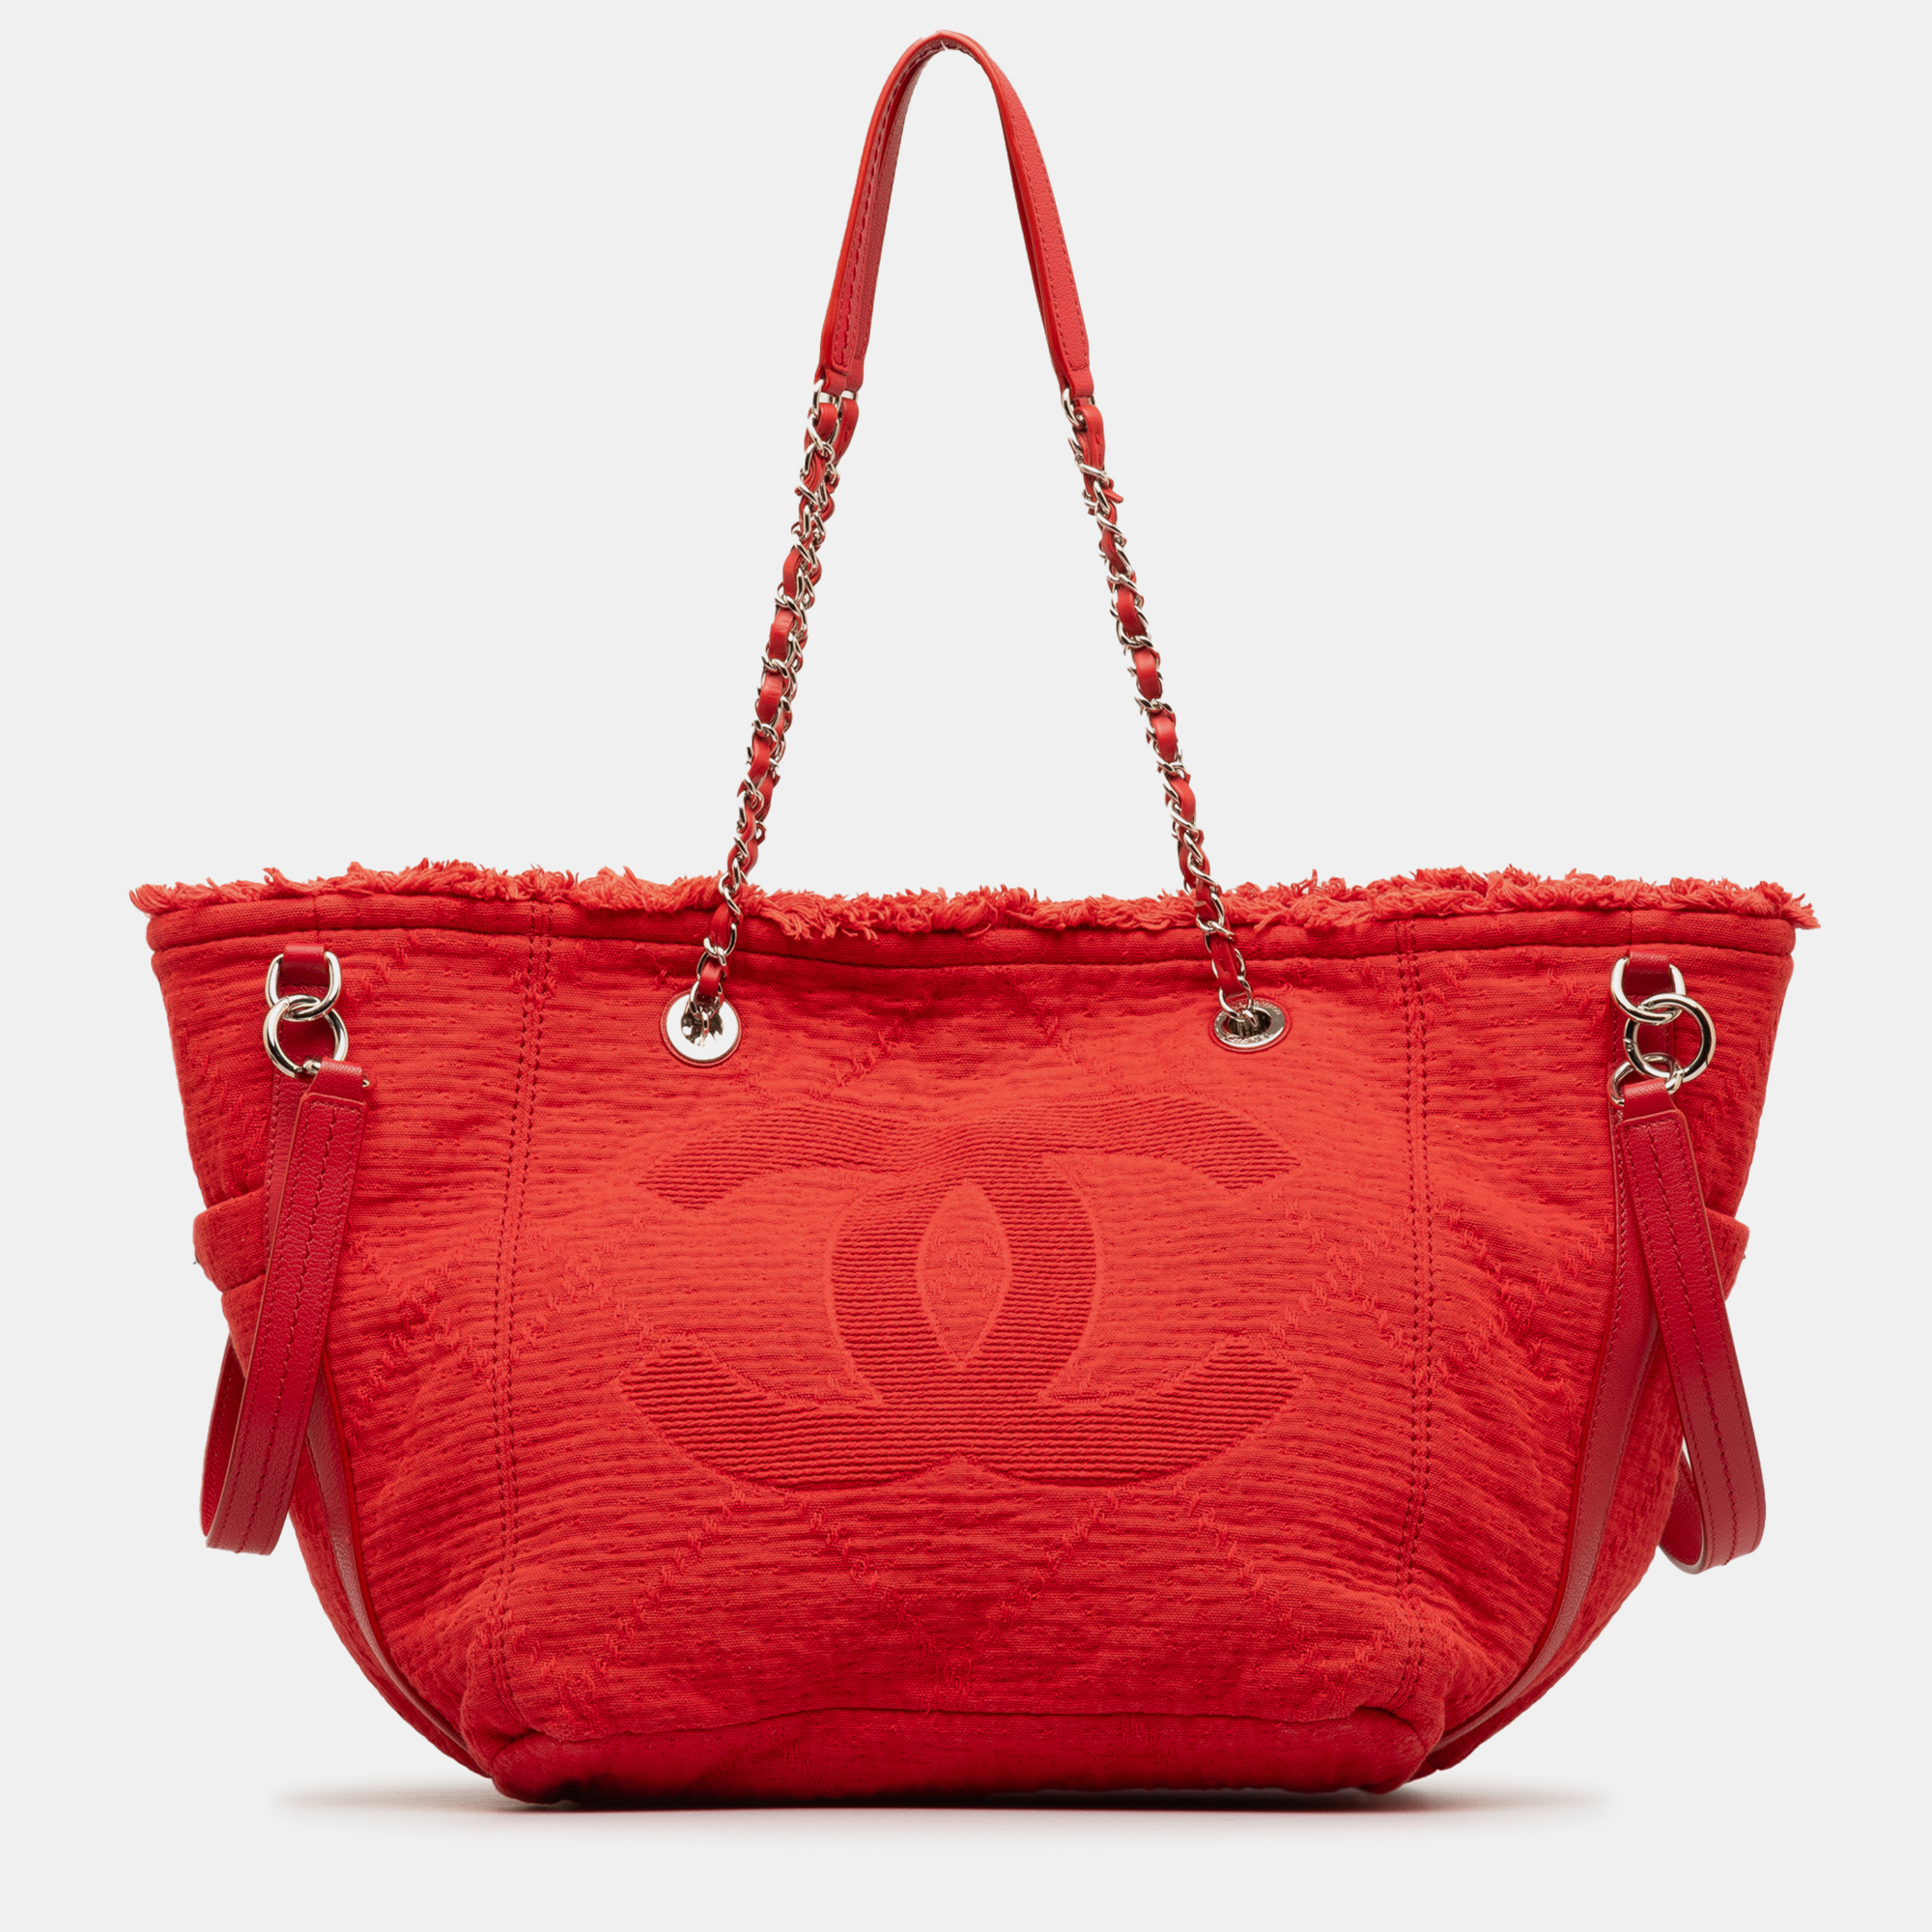 Chanel large double face shopping tote